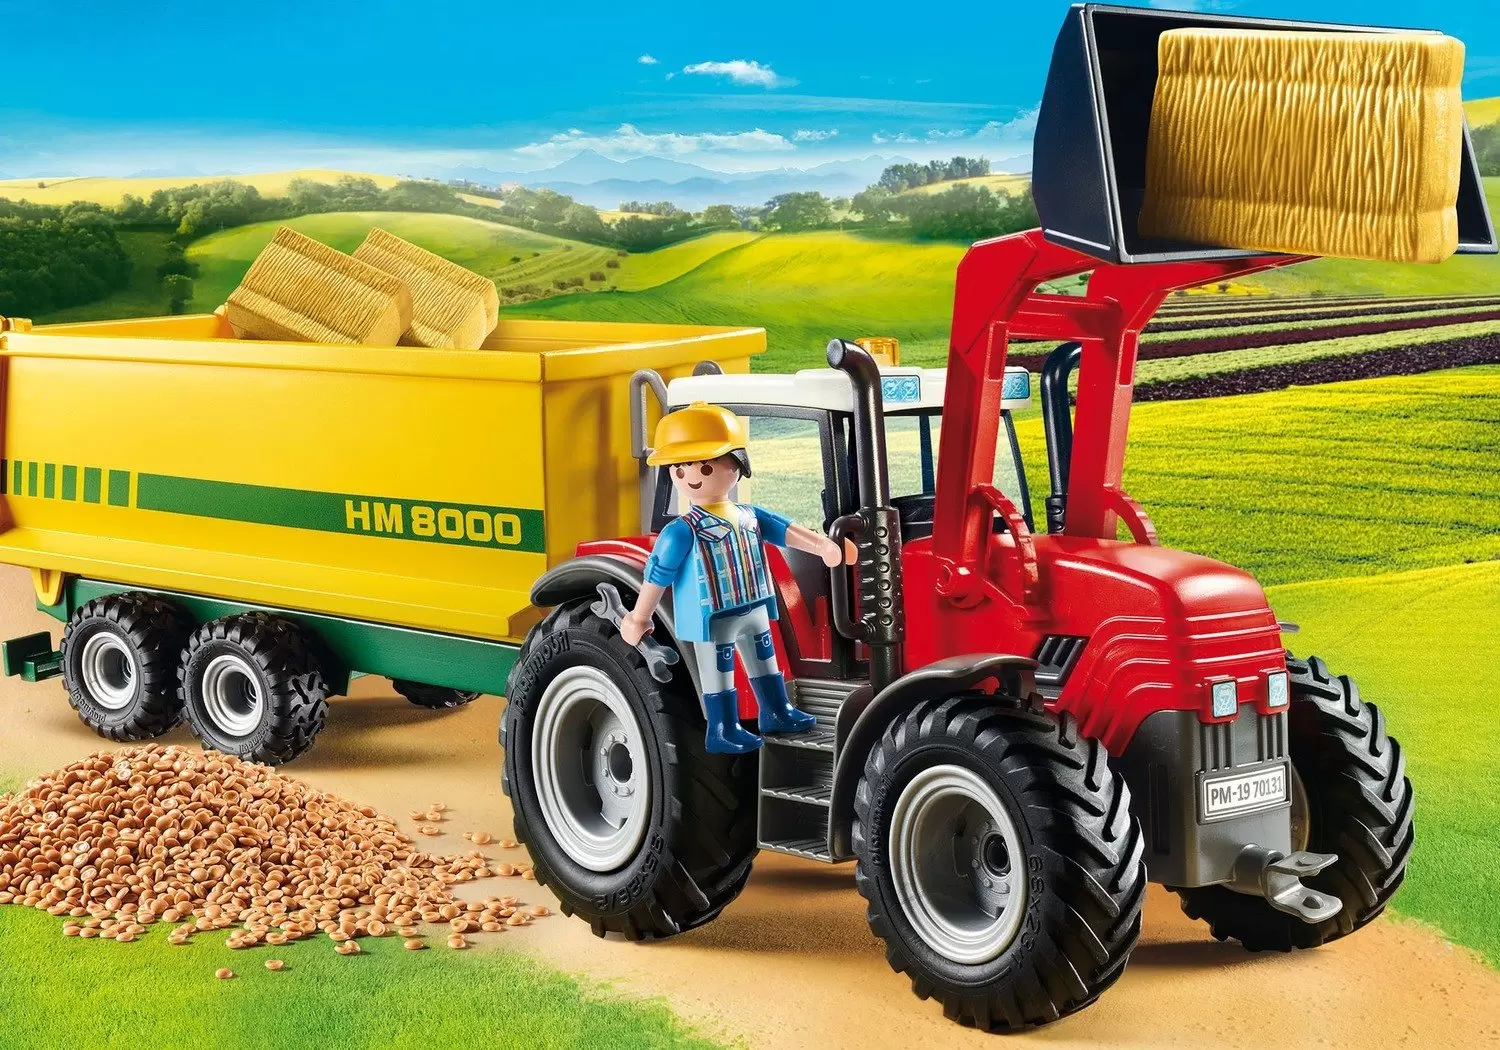 Playmobil Farmers - Country Big Tractor and HM8000 trailer